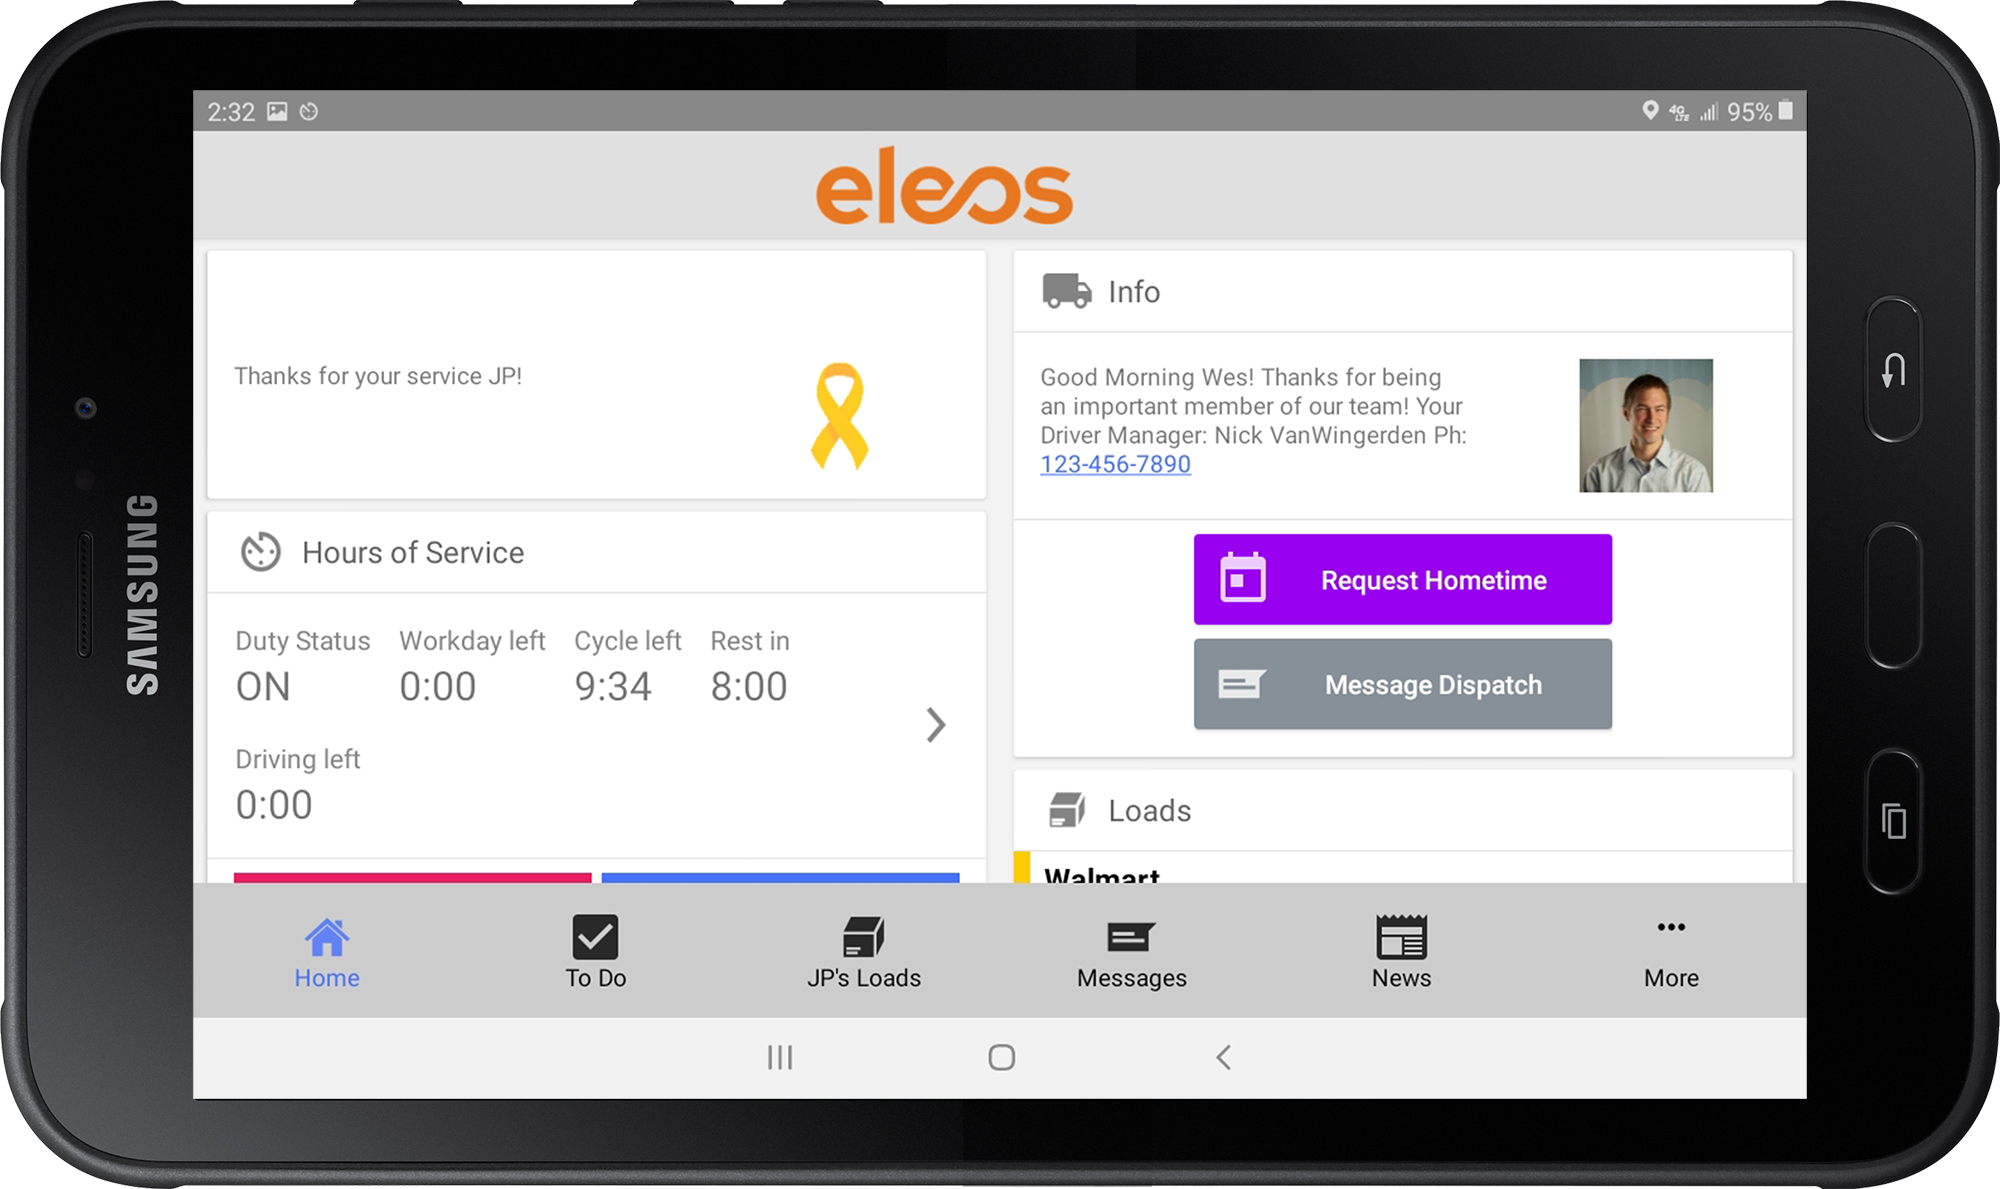 The driver experience is the same no matter what device they are on. Eleos-powered apps work on iOS and Android.